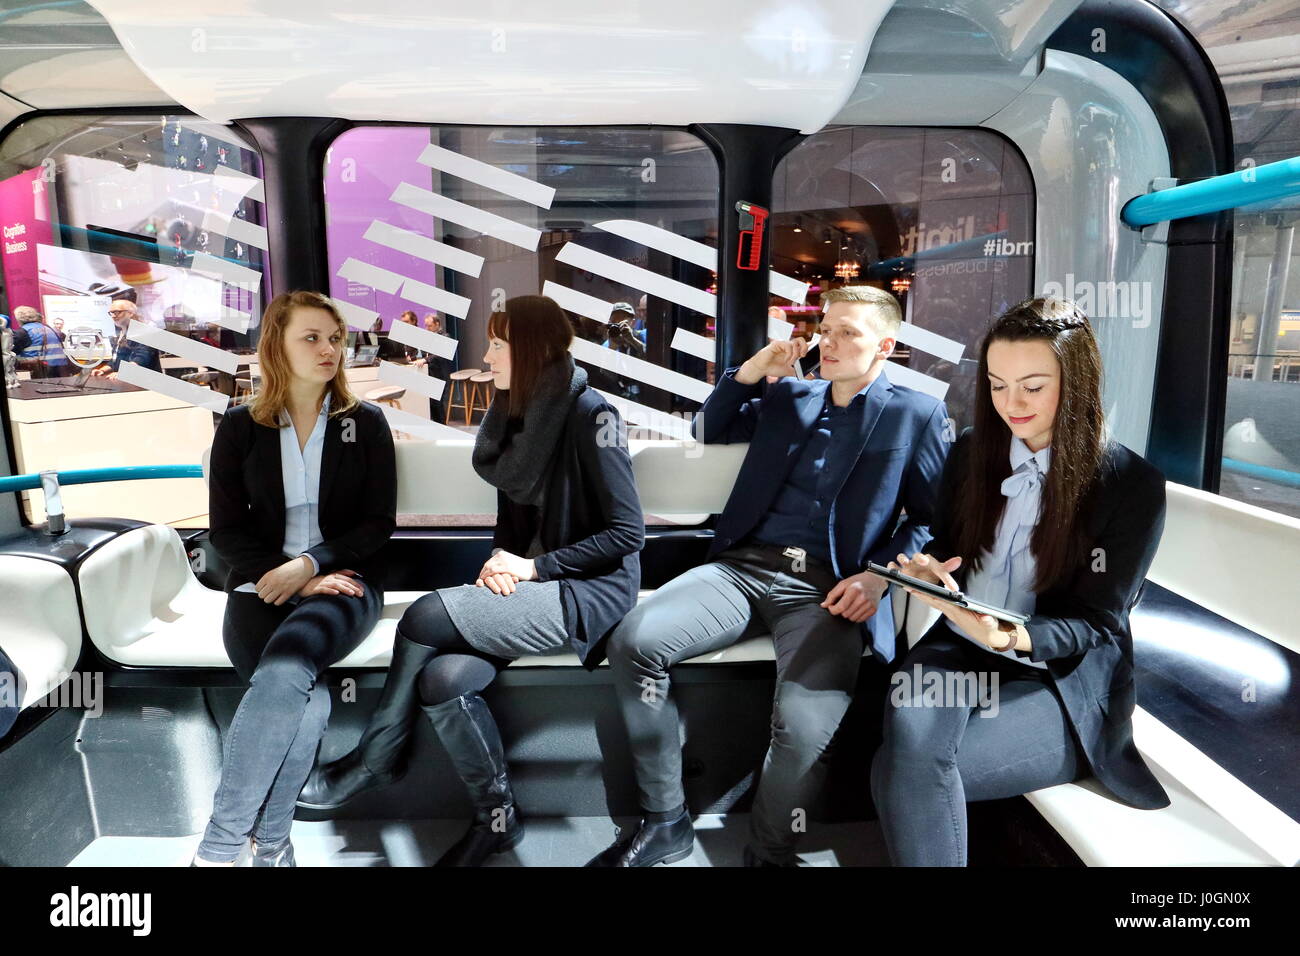 Hanover, Germany. 19th March, 2017. Passengers in self-driving electric minibus 'Olli', developed by Local Motors in cooperation with IBM. IBM-System Watson IoT (Internet of Things) controls the autonomous driving. CeBIT 2017, ICT trade fair, lead theme 'd!conomy - no limits'. Photocredit: Christian Lademann Stock Photo